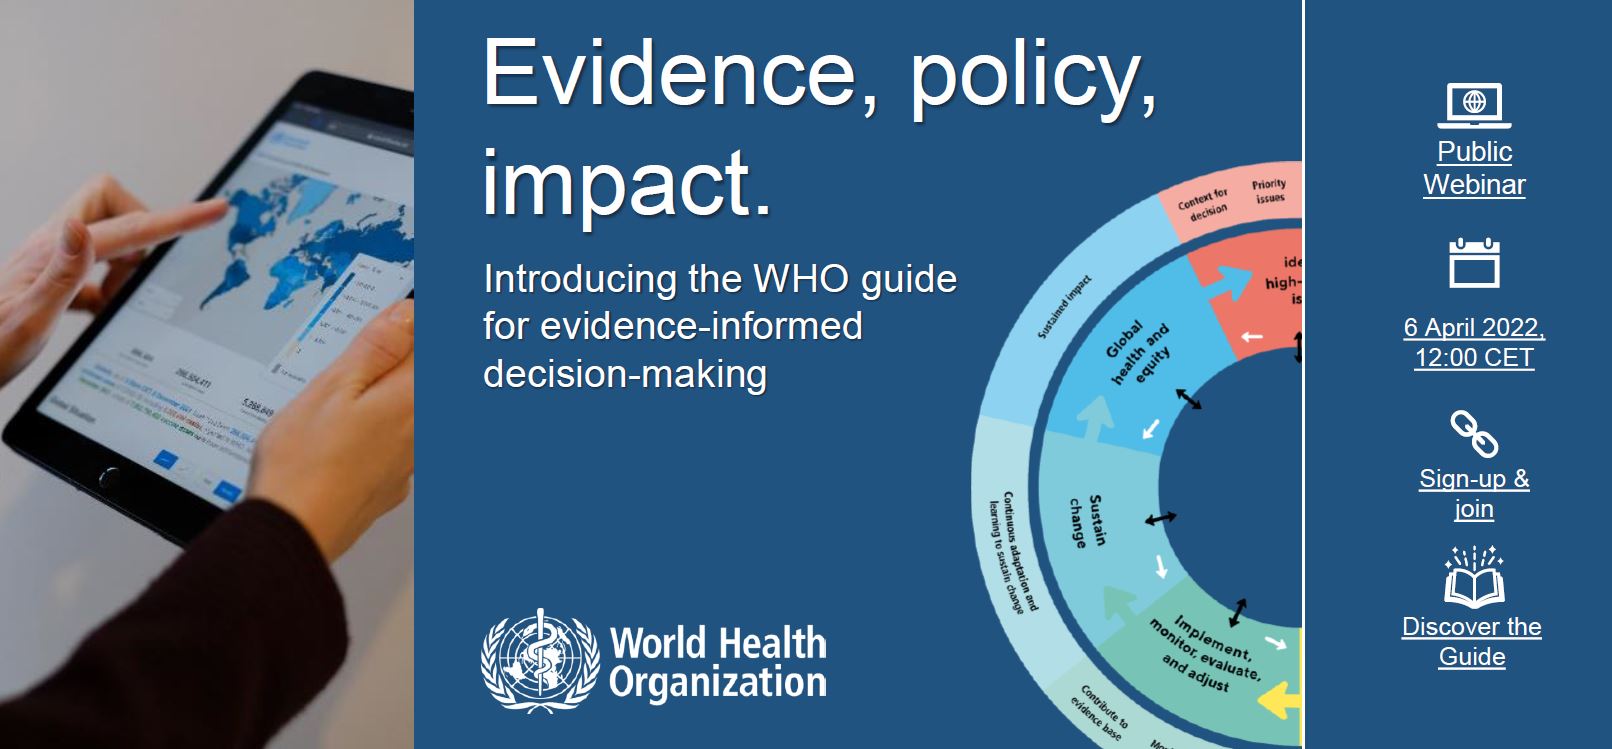 Evidence, policy, impact: Introducing the WHO guide & online repository for evidence-informed decision-making